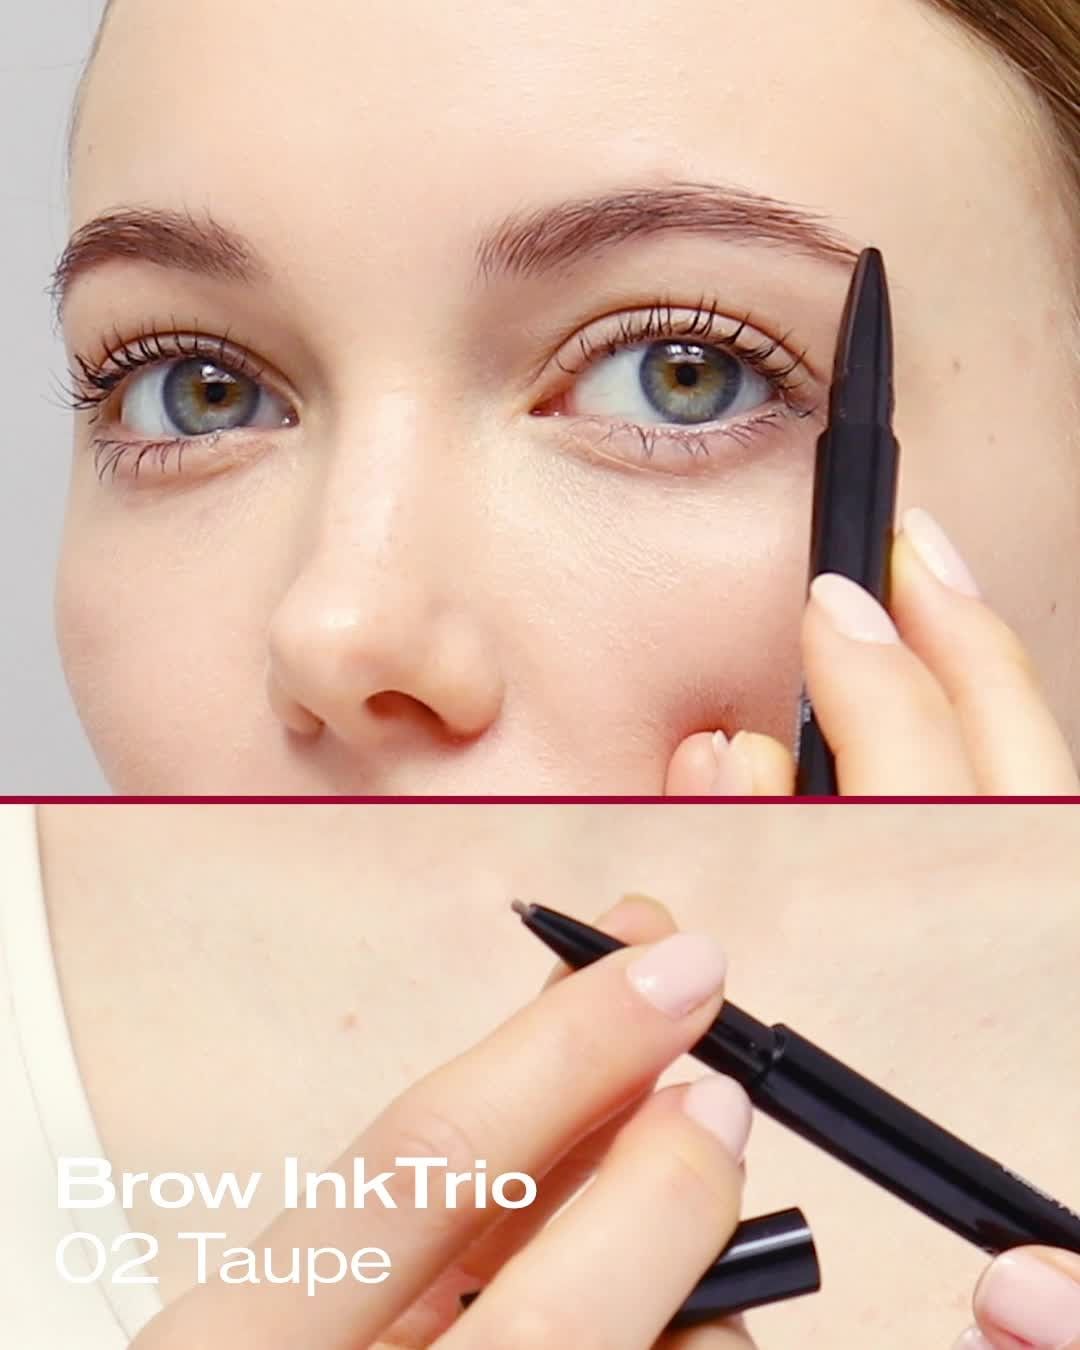 SHISEIDO - For full and feathery brows, follow three easy steps using one foolproof product available now @sephora: Brow InkTrio.⁣
⁣
Step 1: Brush up brows with the spooly brush.⁣
Step 2: Fill in the...